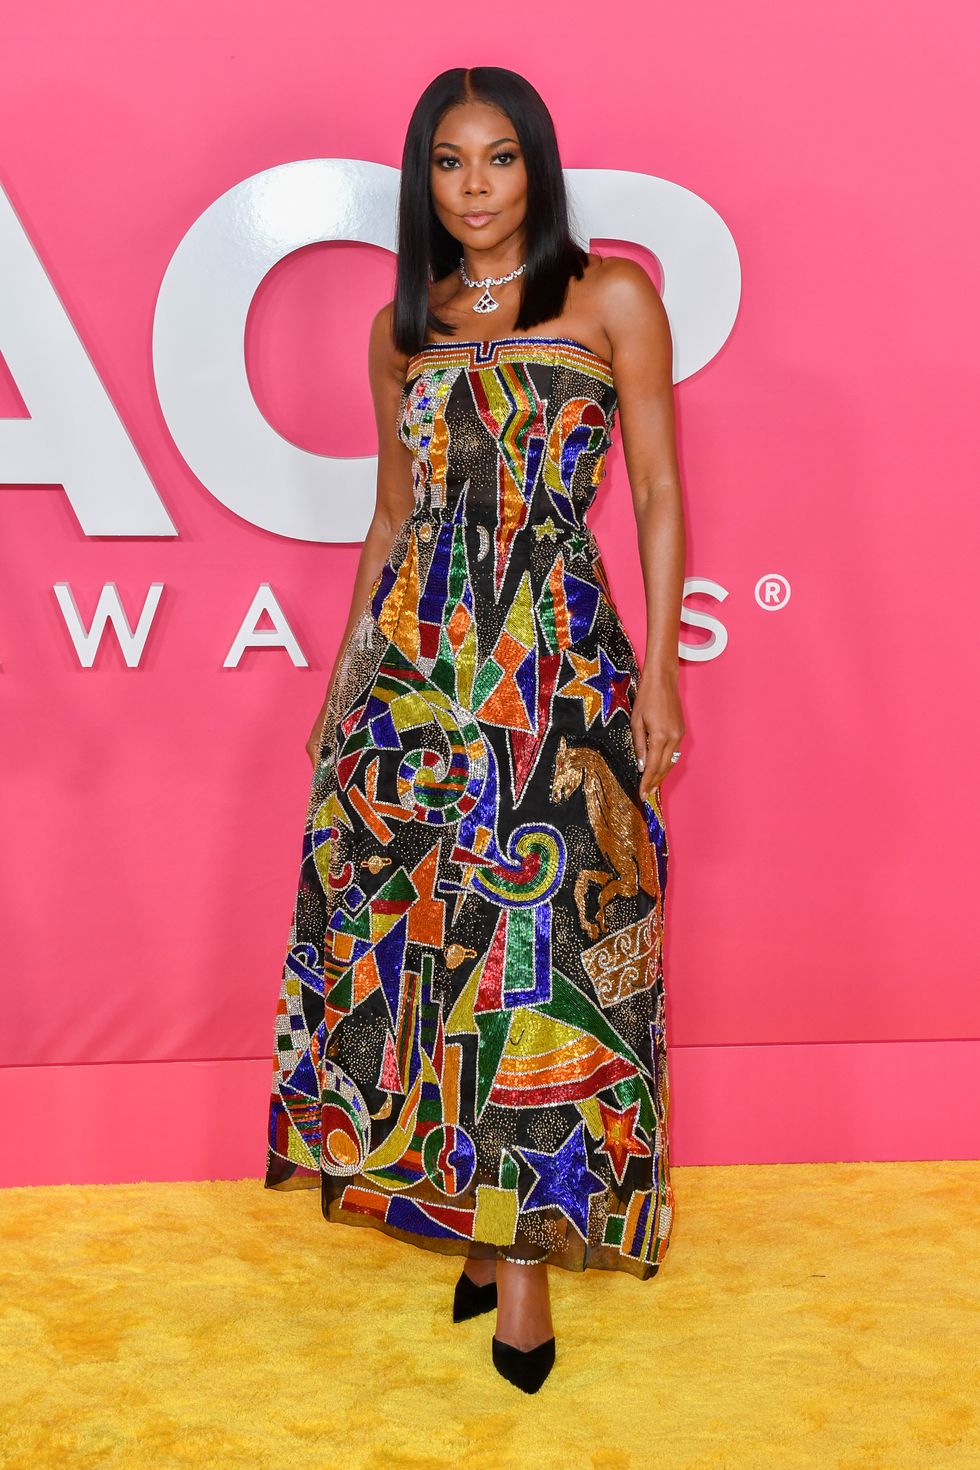 pasadena, california february 25 gabrielle union arrives to the 54th annual naacp image awards at pasadena civic auditorium on february 25, 2023 in pasadena, california photo by aaron j thorntongetty images